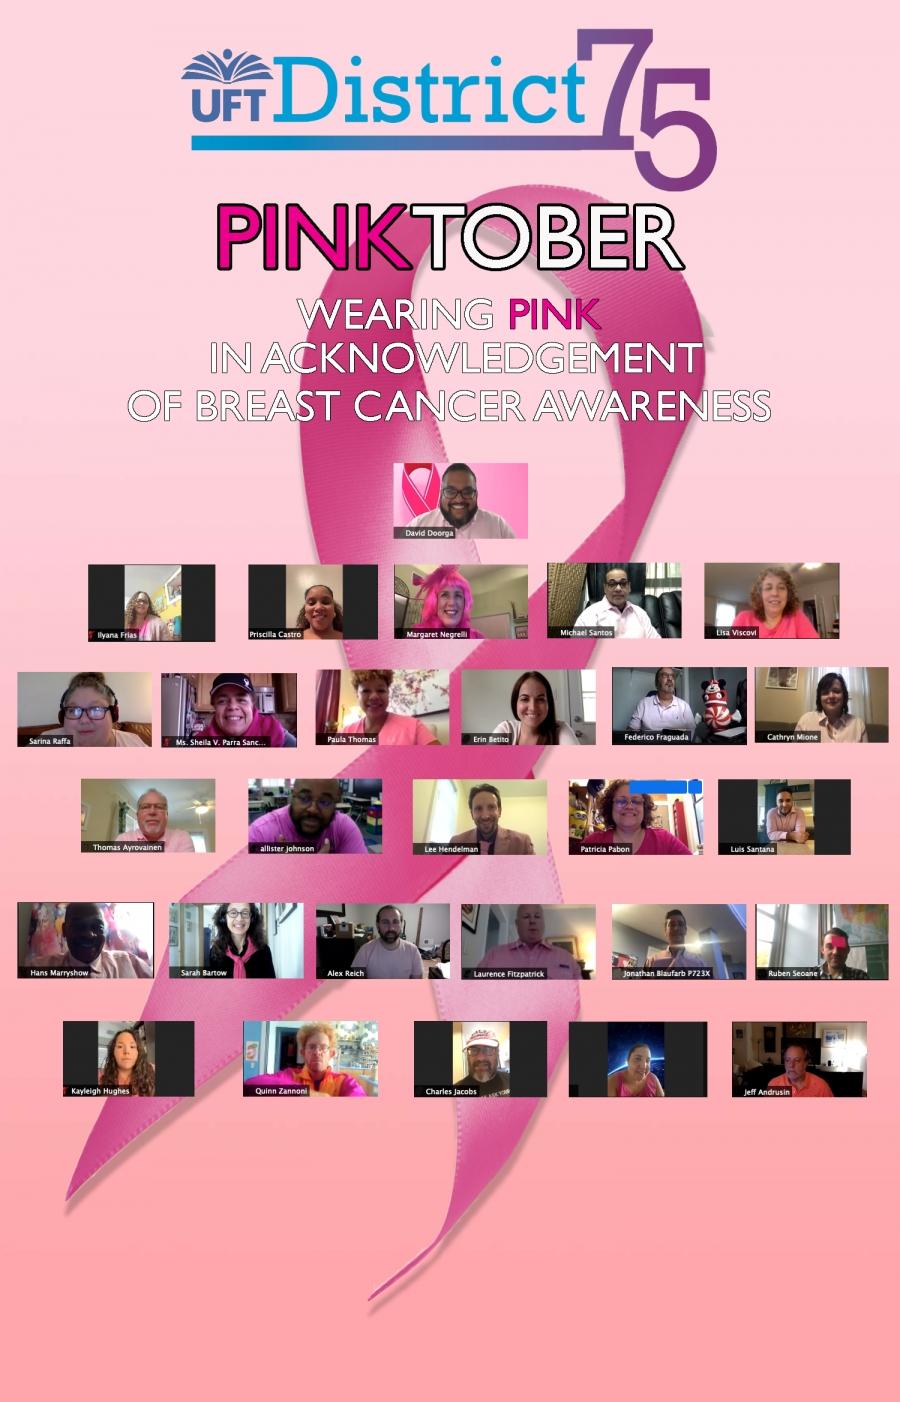 A collection of screenshots of chapter leaders' zoom screens, in which all chapter leaders are wearing pink, set against a graphic backdrop with a pink ribbon and text reading "District 75 Pinktober: Wearing pink in acknowledgement of breast cancer awareness." 